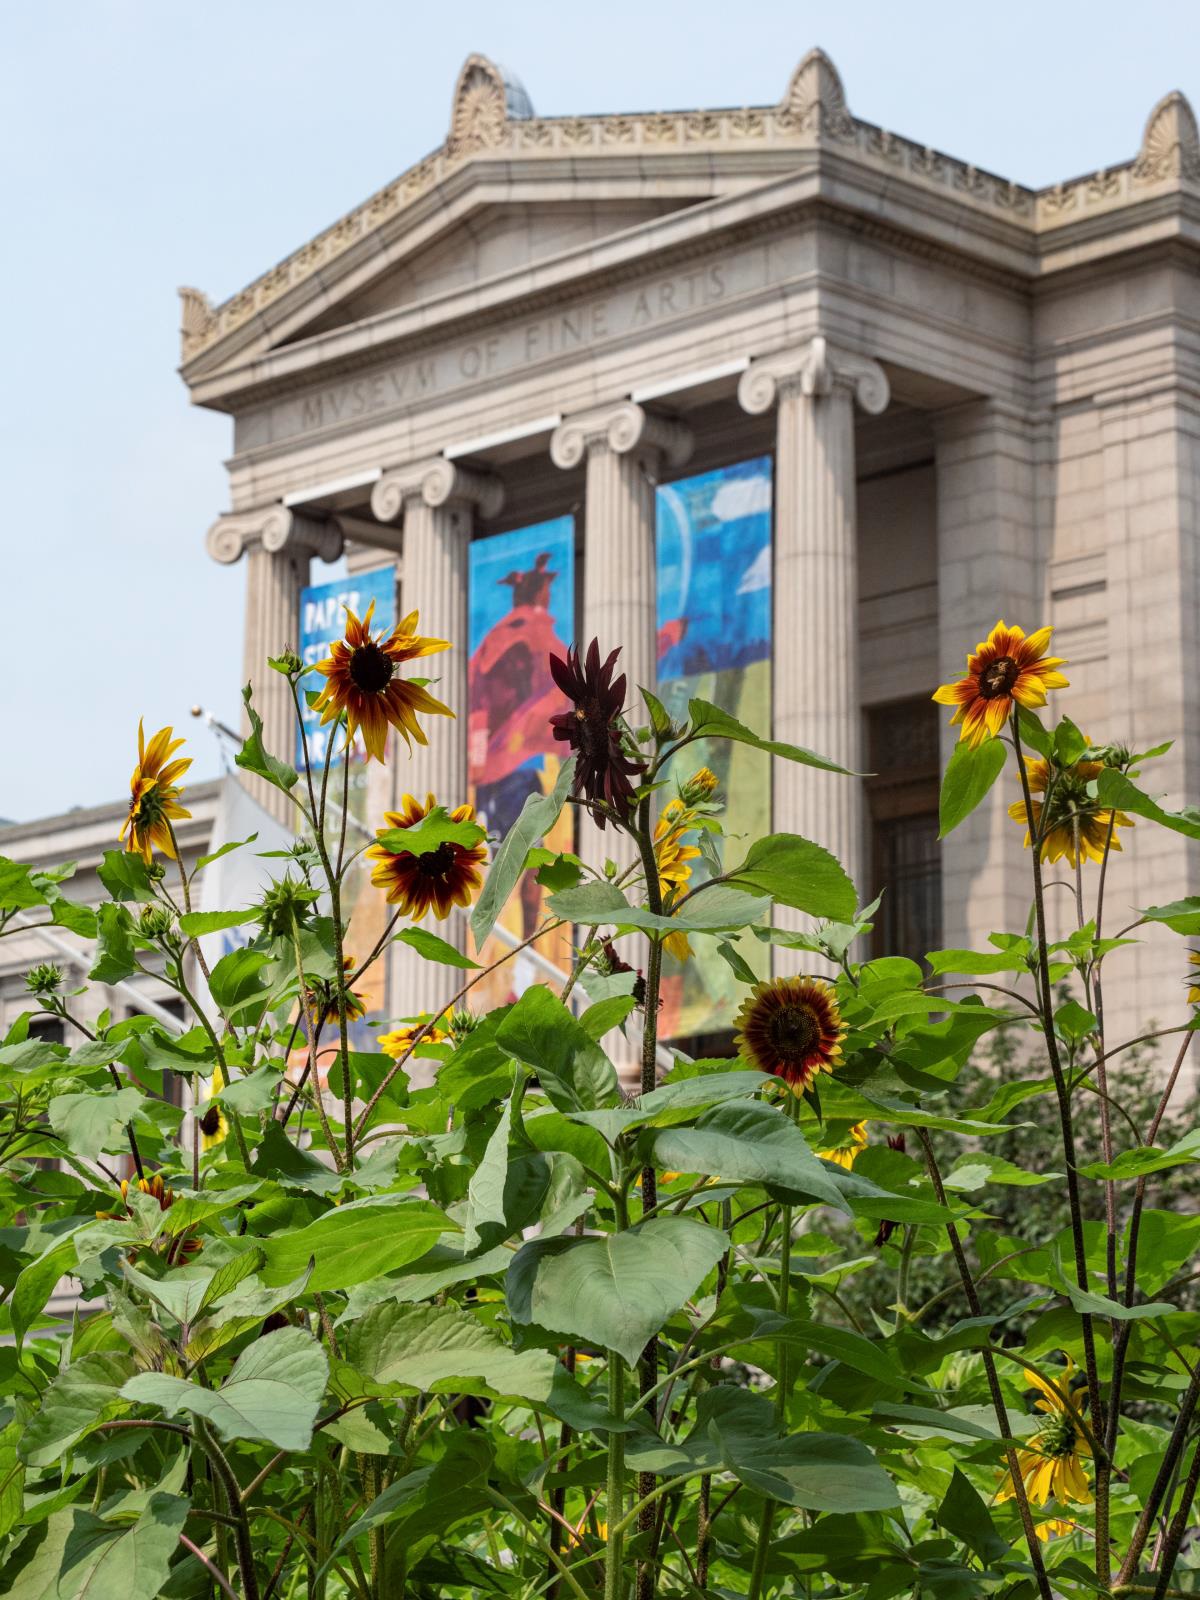 Color photograph of sunflowers growing outside a neoclassical stone building with columns and the words "Museum of Fine Arts" under its pediment